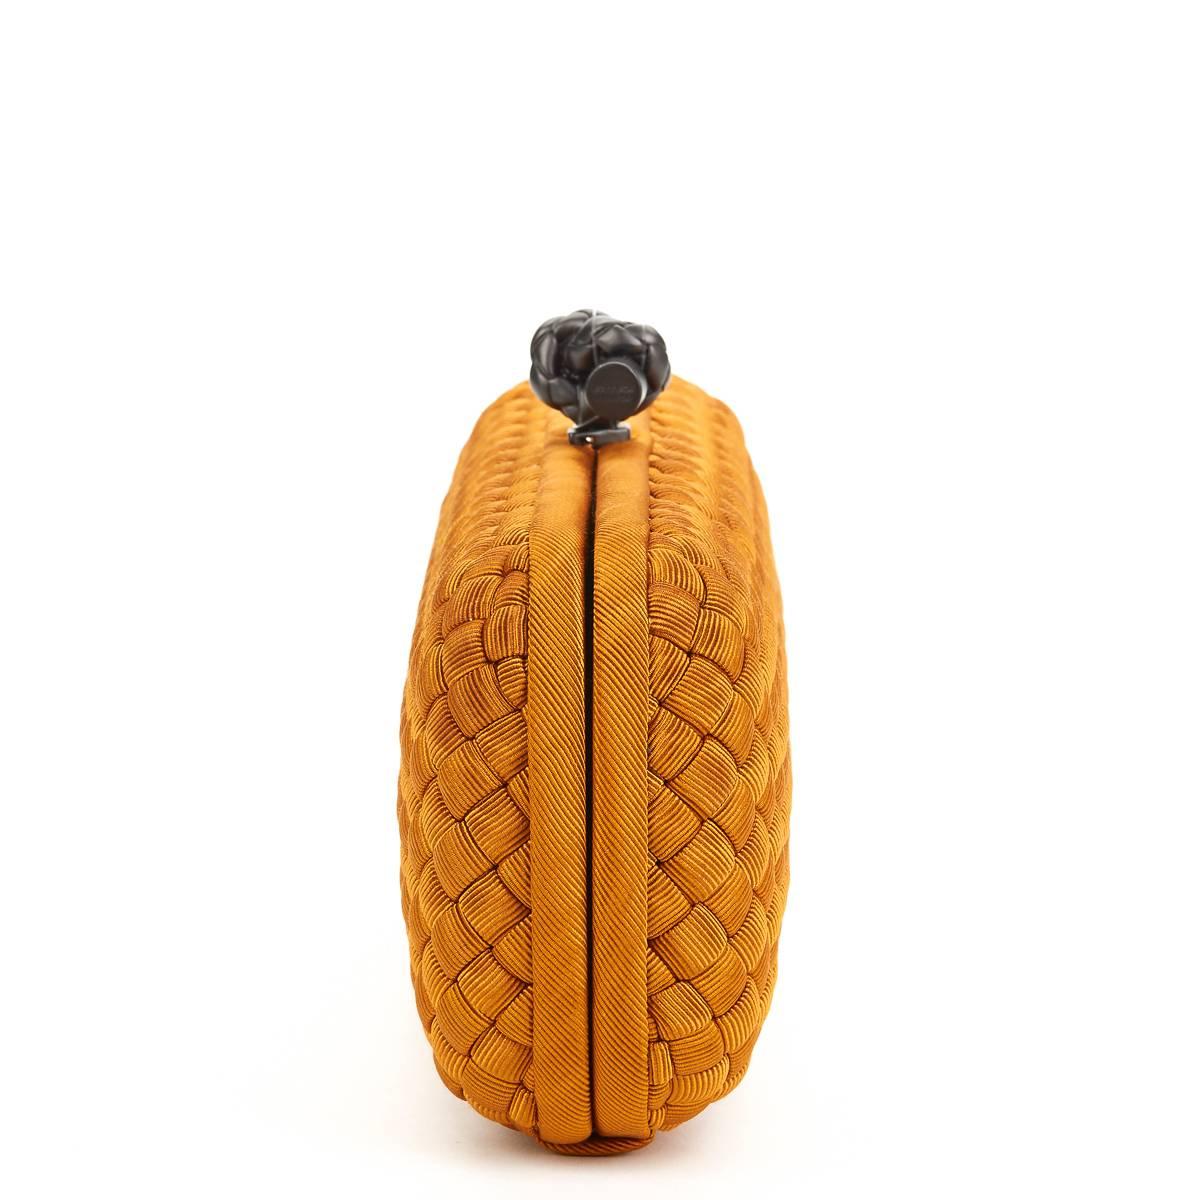 BOTTEGA VENETA
Burnt Orange Woven Faille Silk Long Knot Clutch

This BOTTEGA VENETA Long Knot Clutch is in Excellent Pre-Owned Condition. Circa 2000. Primarily made from Faille Silk complimented by Gunmetal hardware. Our  reference is HB687